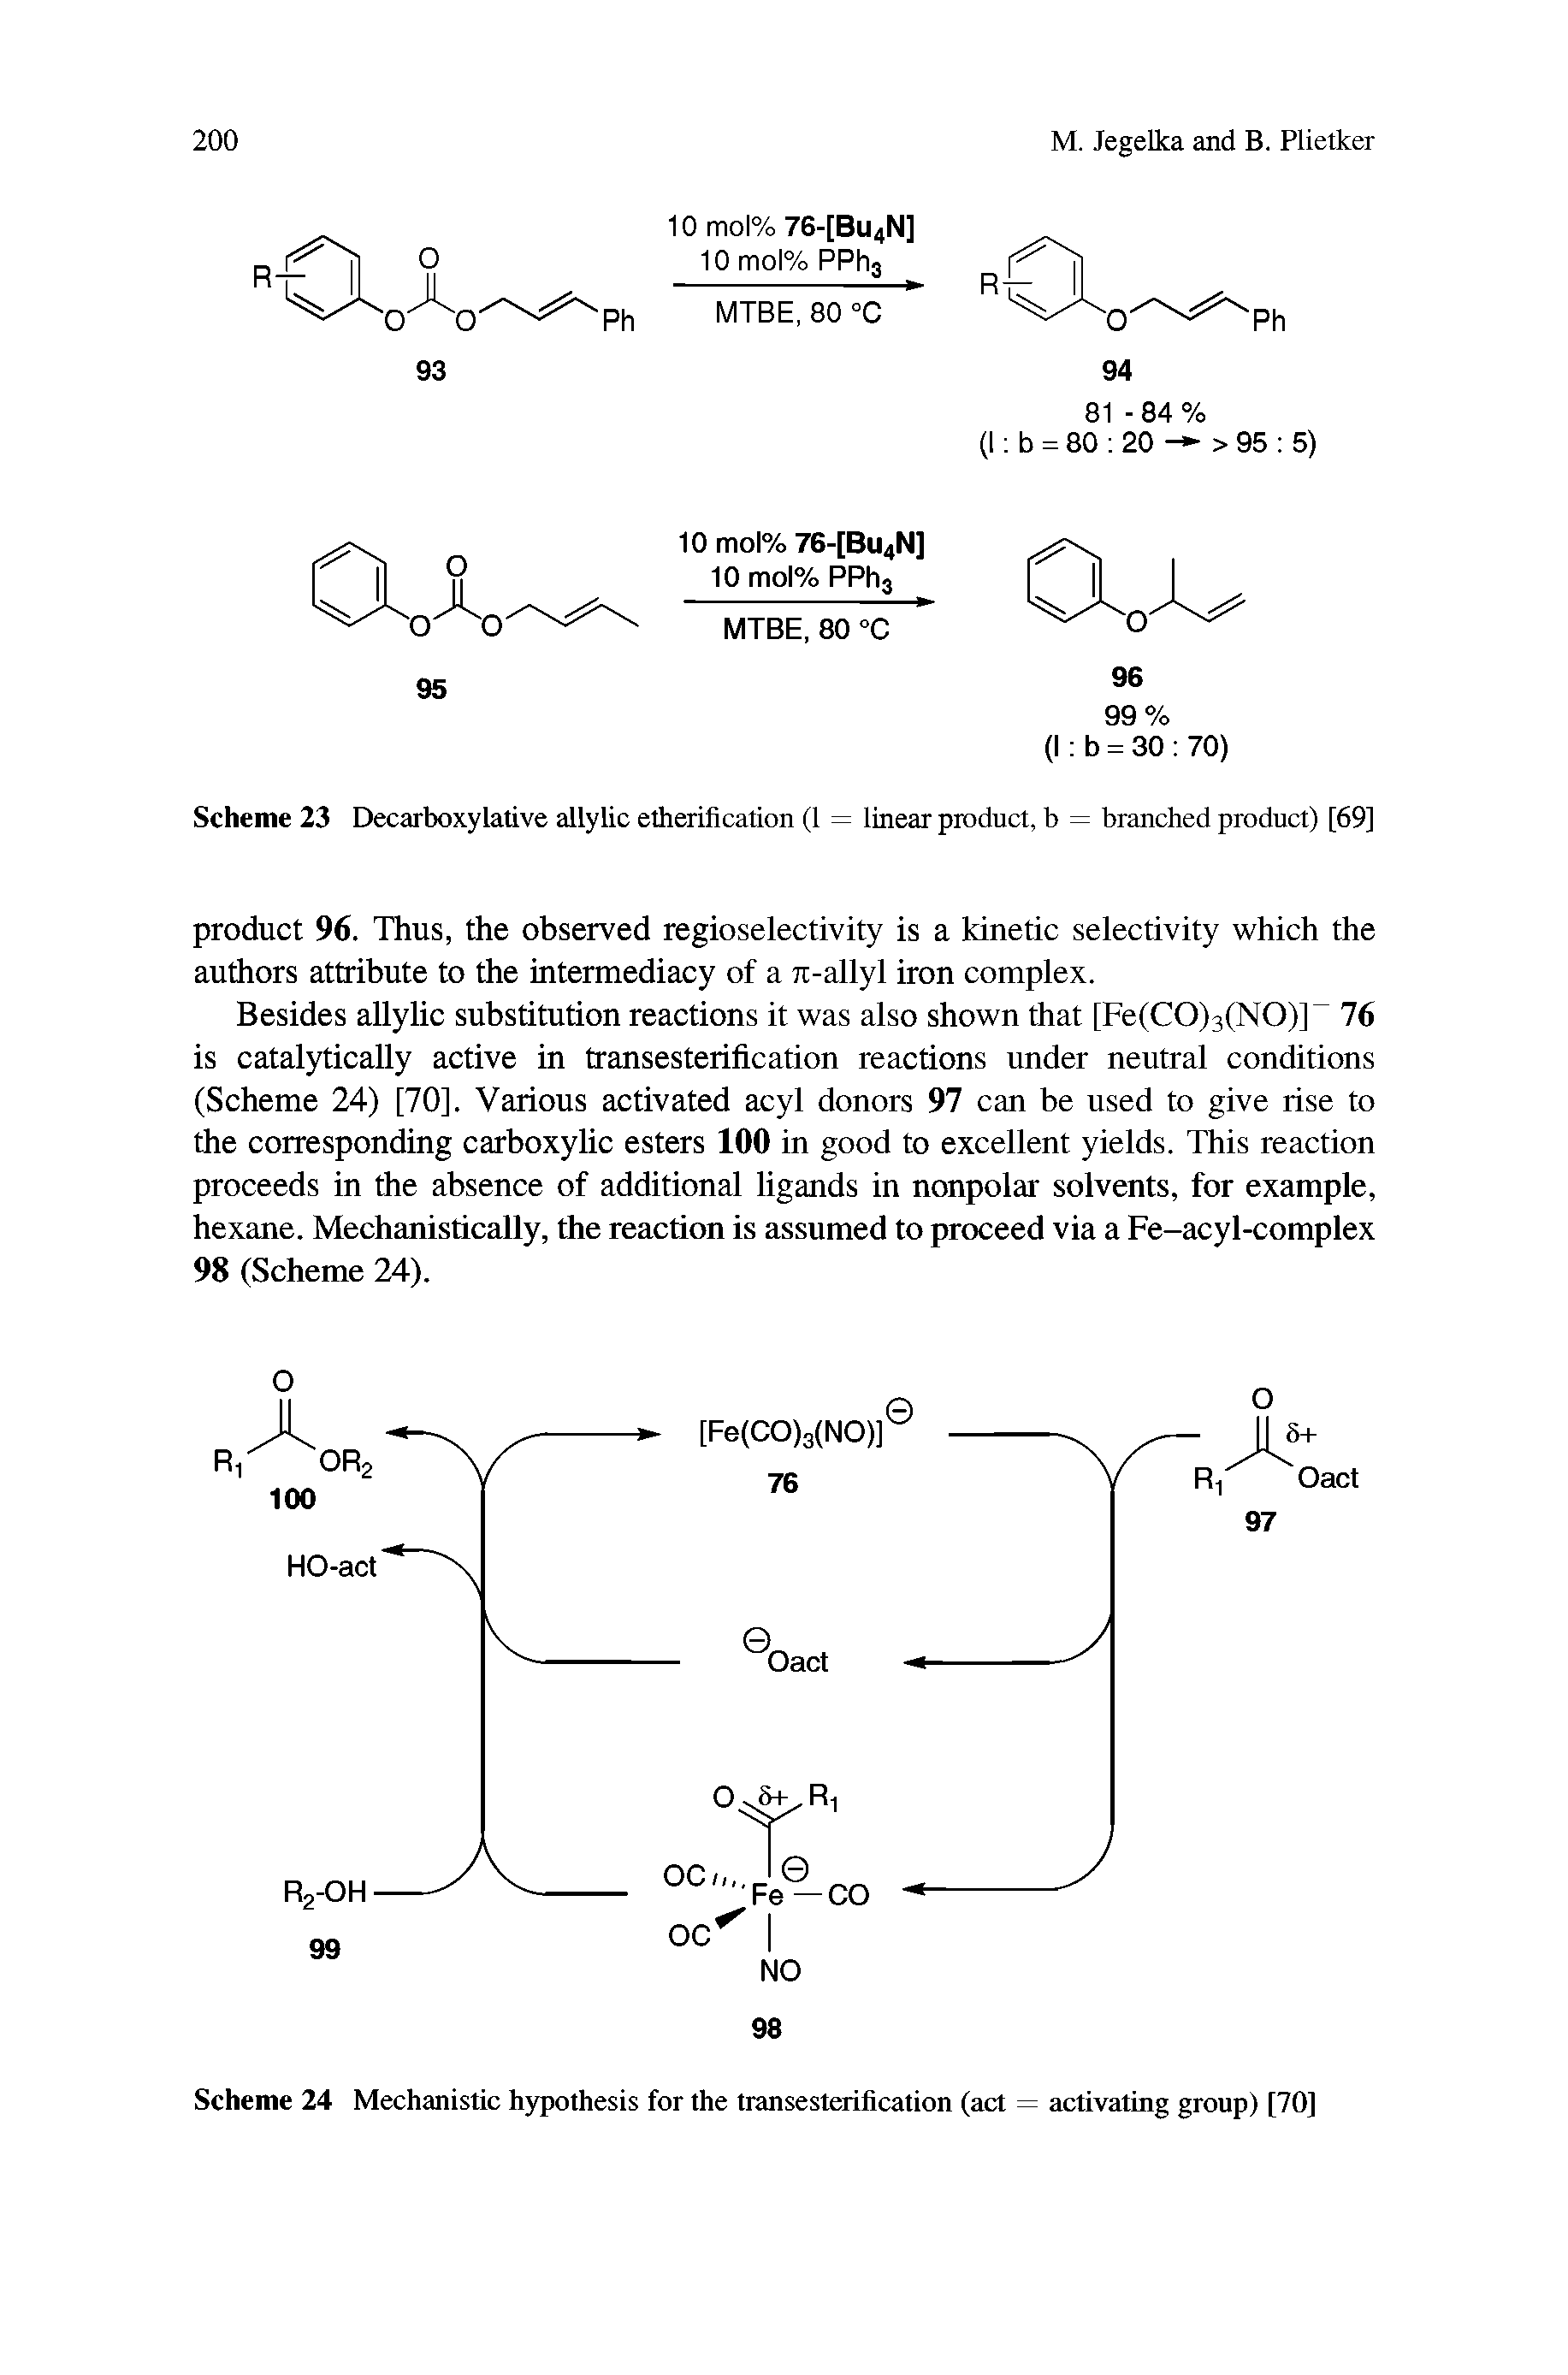 Scheme 23 Decarboxylative allylic elherification (1 = linear product, b = branched product) [69]...